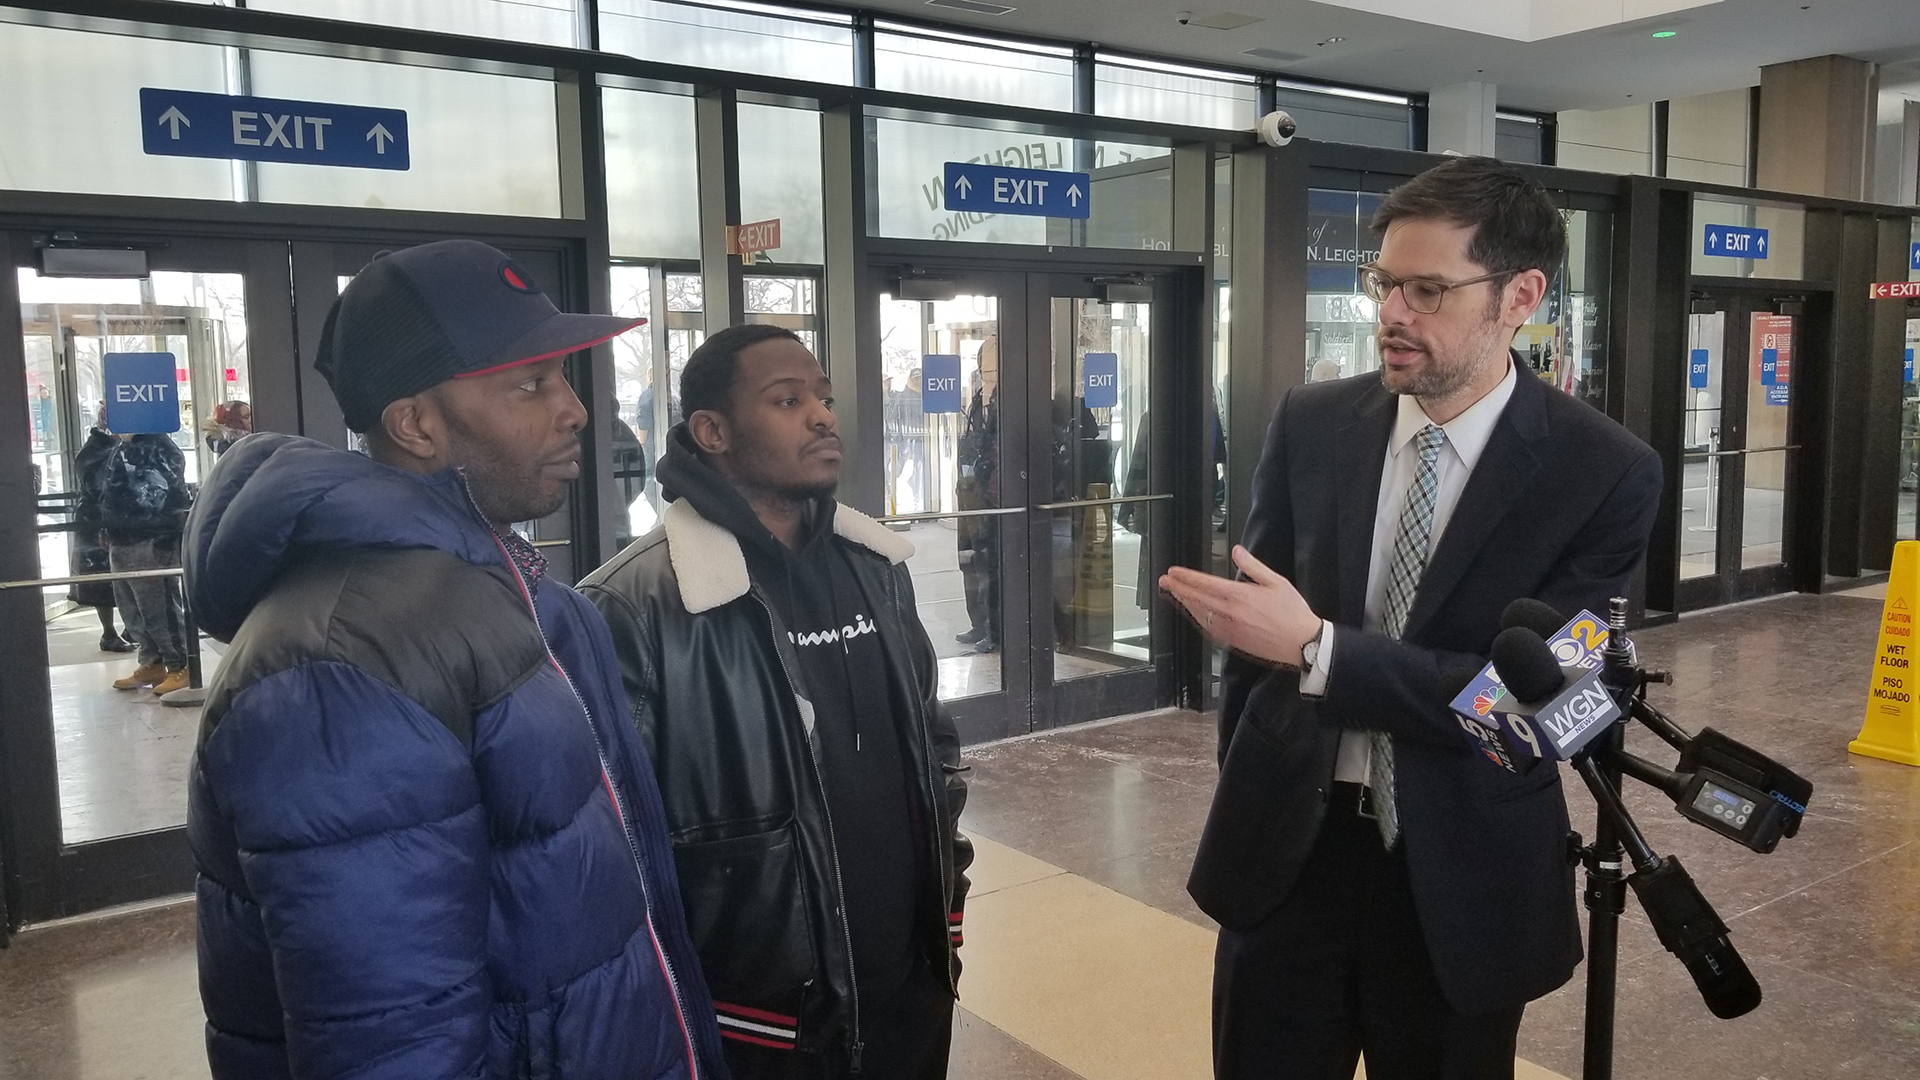 Attorney Joel Flaxman, right, stands inside the Leighton Criminal Court Building with Jermaine Coleman, center, and Germain Sims on Wednesday, Feb. 13, 2019. (Matt Masterson / Chicago Tonight)